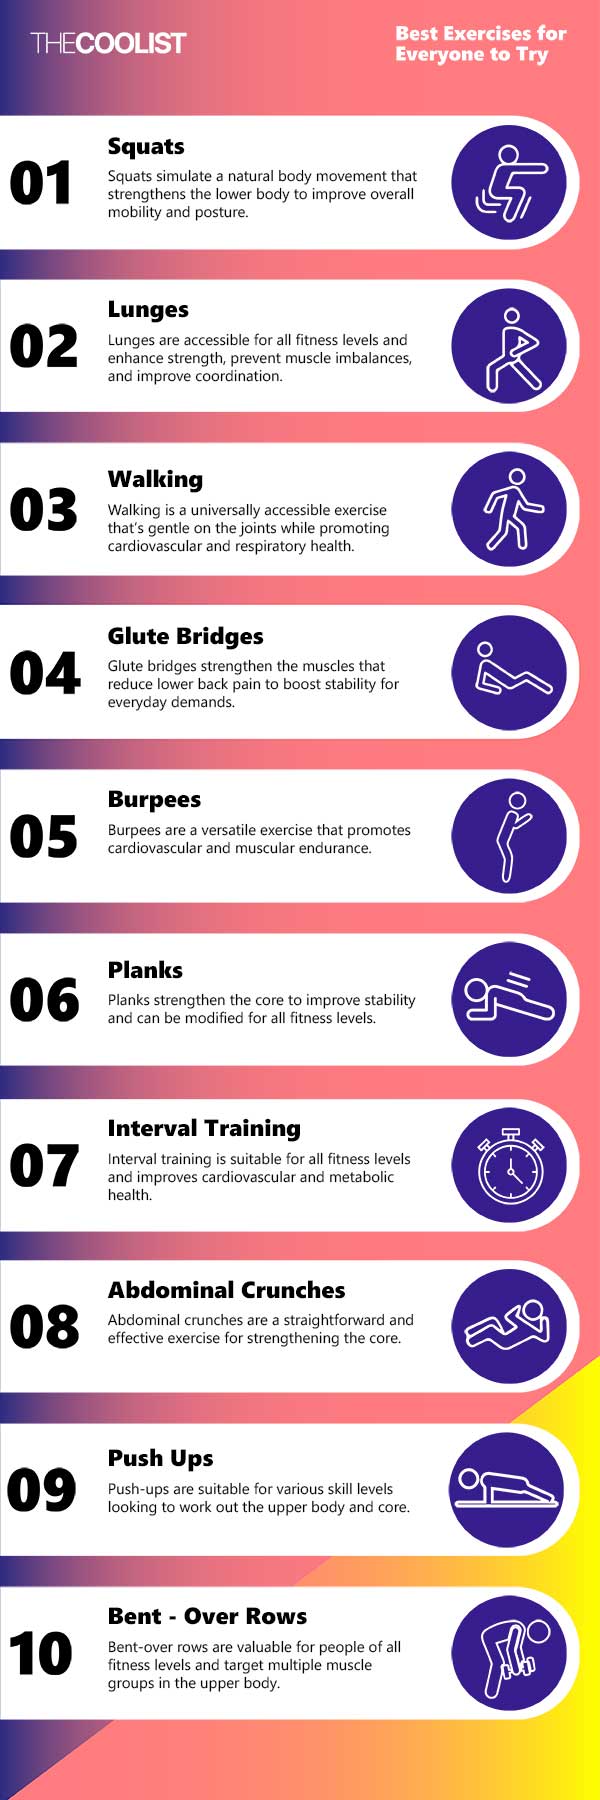 Best exercises to try